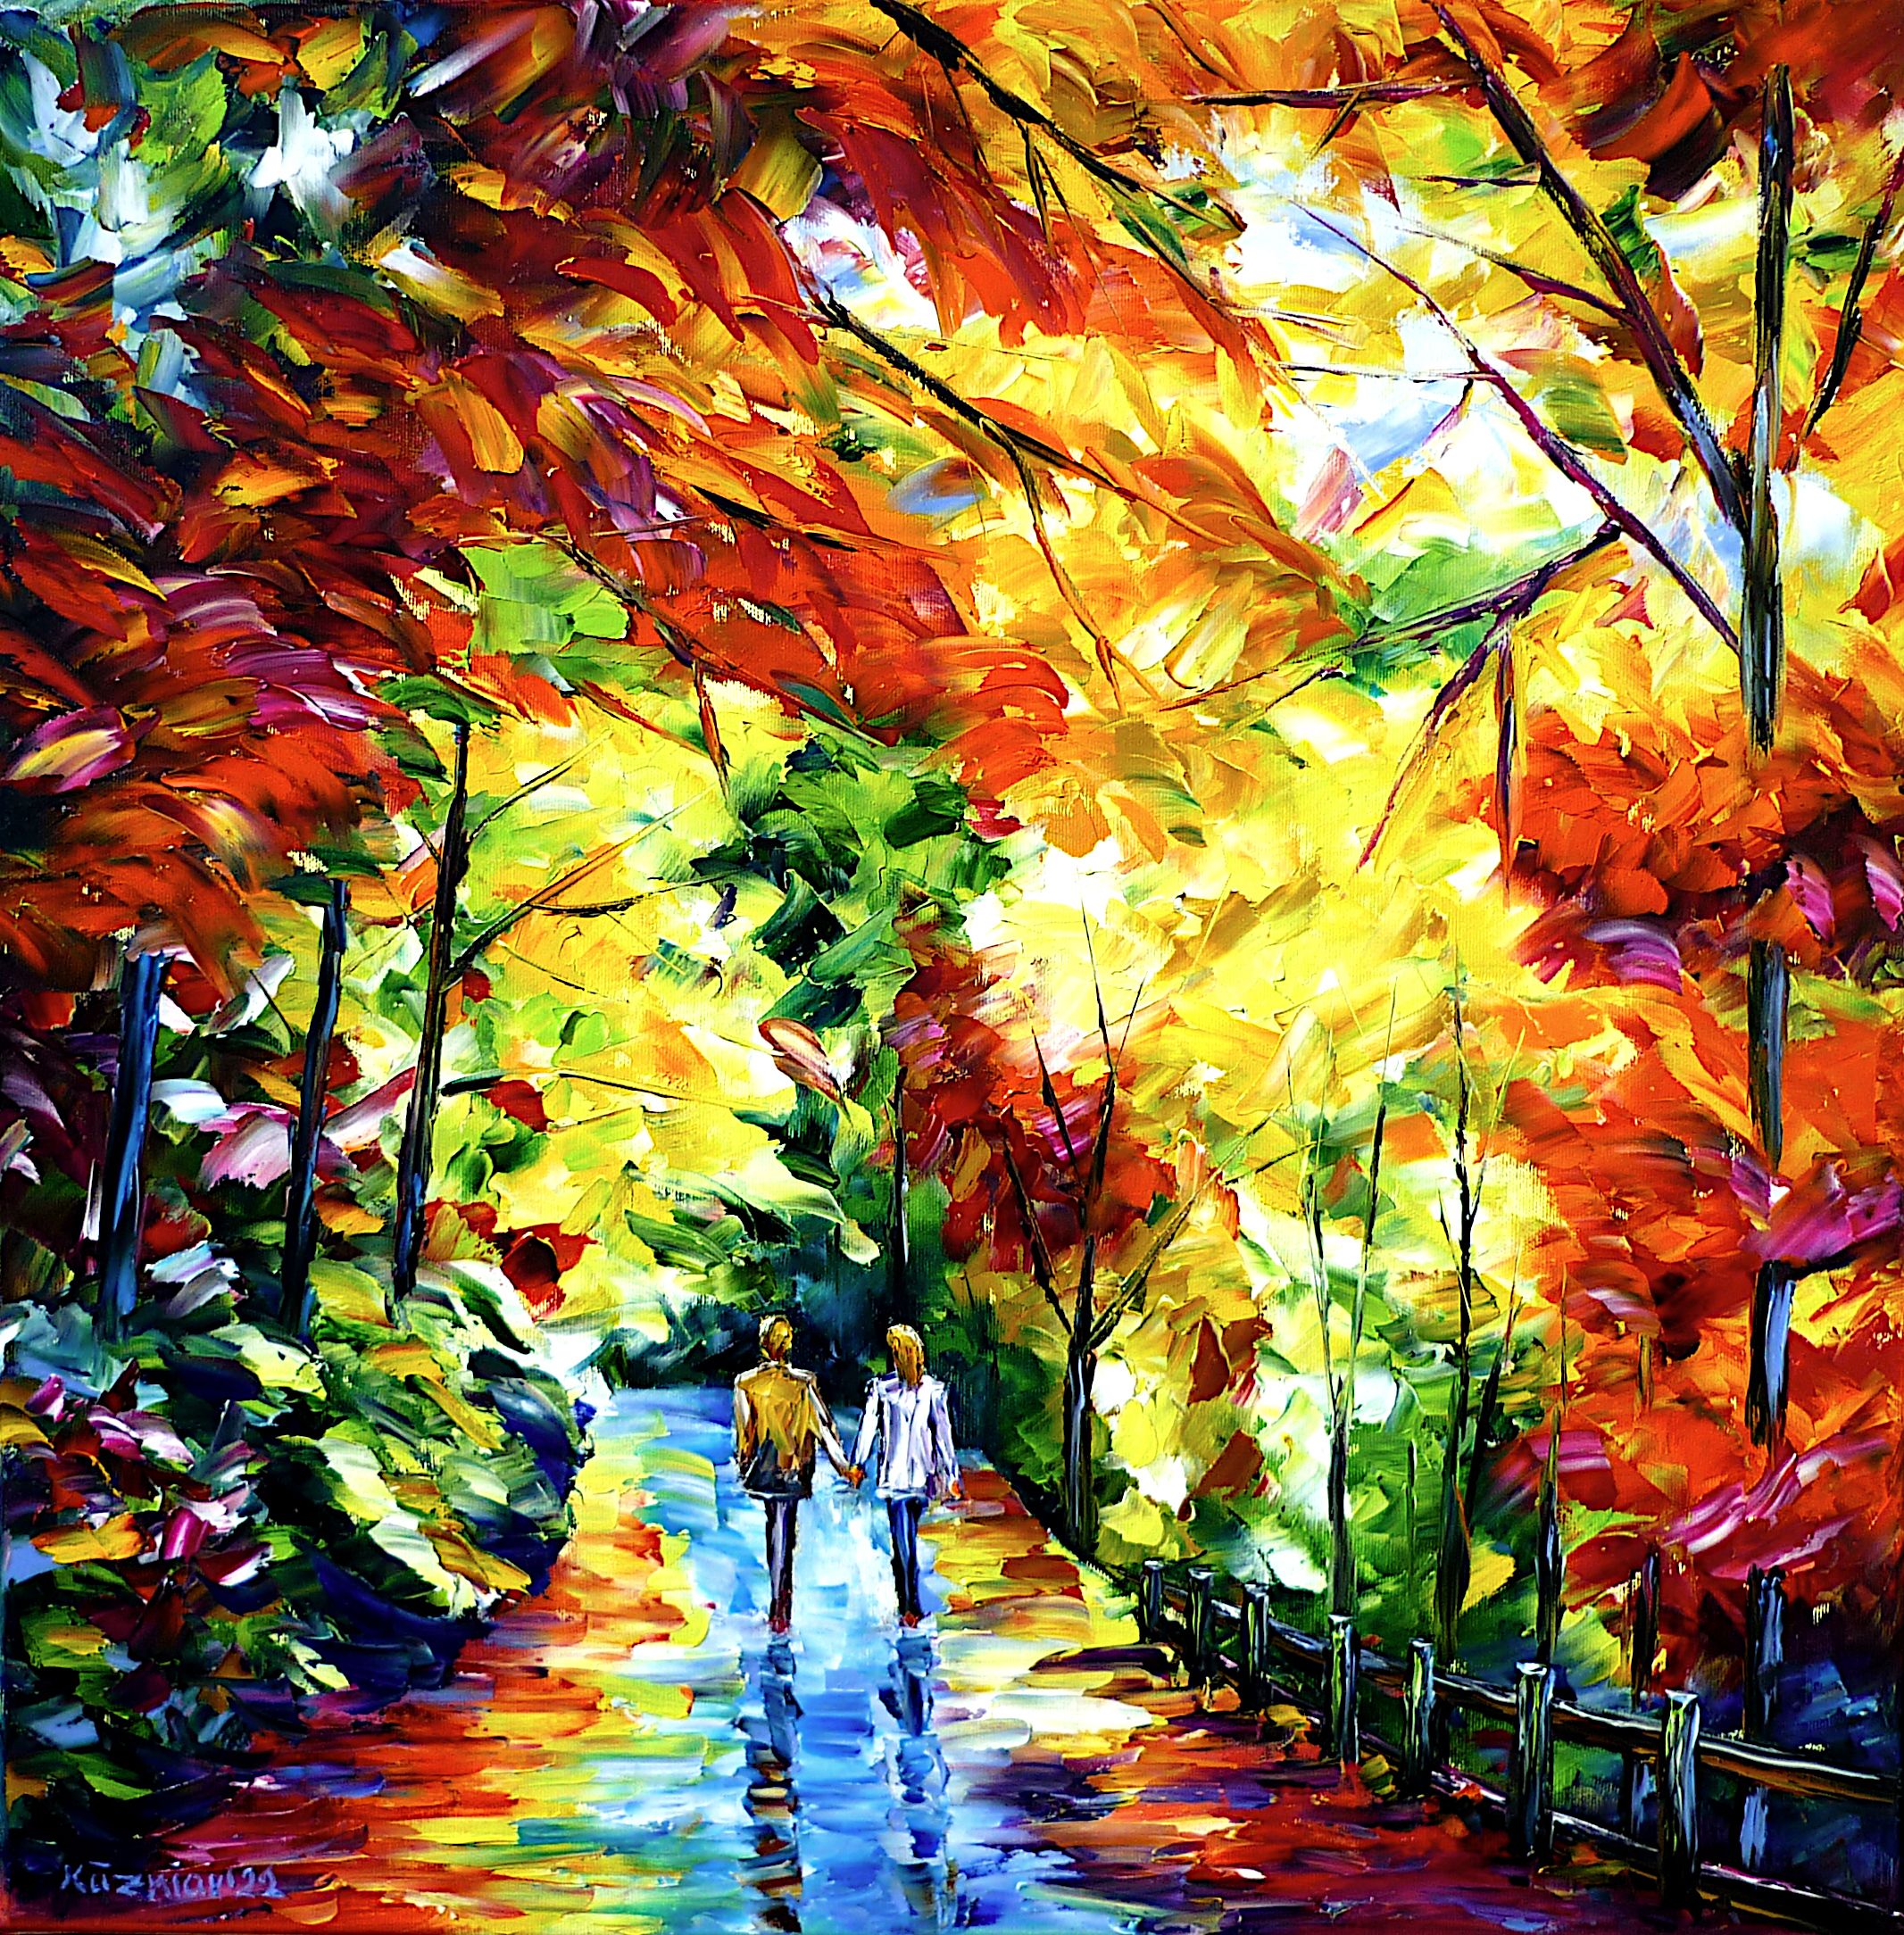 colorful autumn park,loving couple in autumn,lovers in autumn,autumn walk,park walk,people in love,lovers in the park,walking in the park,hand in hand,holding hands,love,autumn mood,romantic,romantic scene,romantic day,Autumn romance,autumn forest,forest walk,forest in autumn,walk in the forest,forest painting,colorful forest,I love you,autumn joy,people in the park,People in autumn,colourful,mood,autumn lovers,I love autumn,park landscape,autumn landscape,autumn trees,colorful autumn,lively autumn,autumn colors,autumn painting,autumn picture,sunny autumn day,autumn abstract,red autumn,autumn leaves,autumn beauty,autumn impression,autumn light,autumn,autumn love,landscape painting,square format,square picture,square painting,yellow red green,palette knife oil painting,modern art,impressionism,abstract painting,lively colors,colorful painting,bright colors,light reflections,impasto painting,figurative